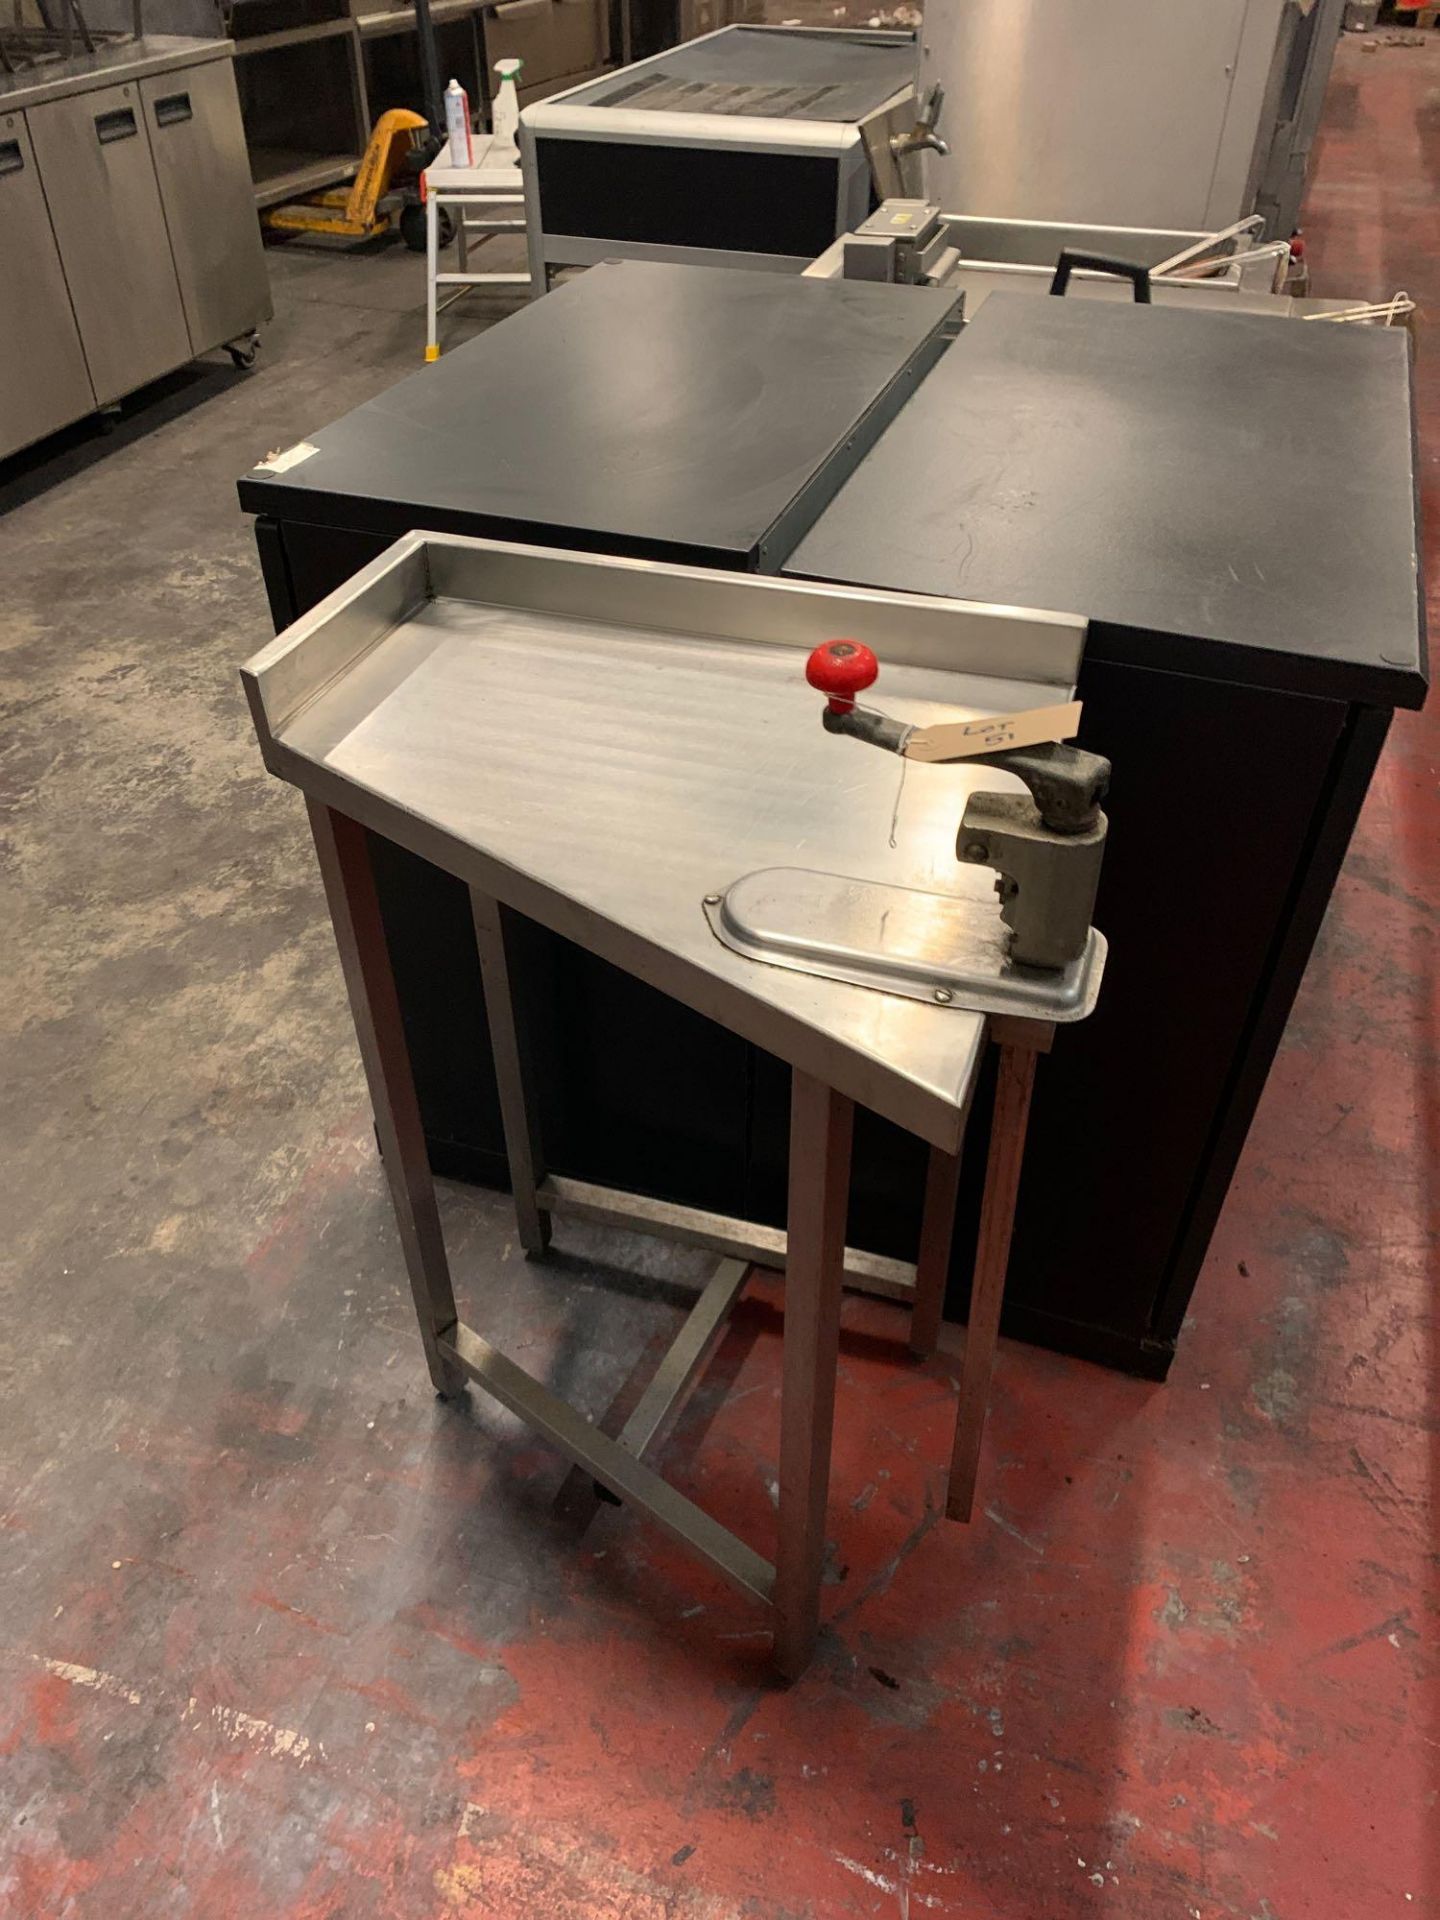 Stainless Steel preparation aation Table With Can Opener 58cm X 51cm X 85cm - Image 2 of 4